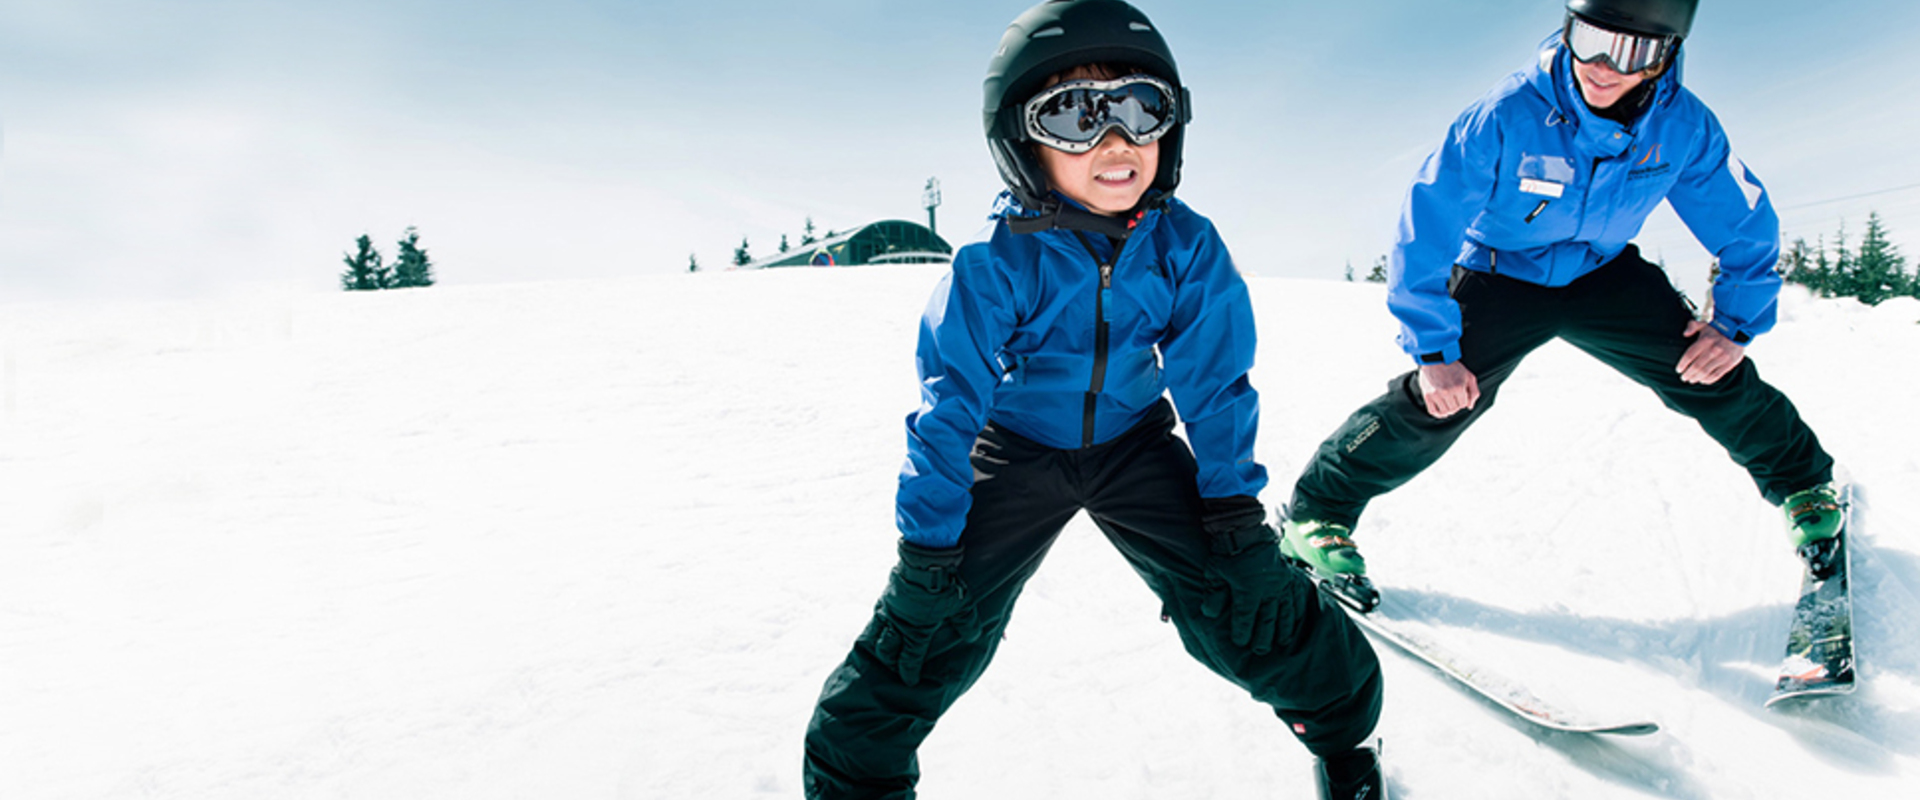 Save 20 percent on snow camps and clinics until November 30.